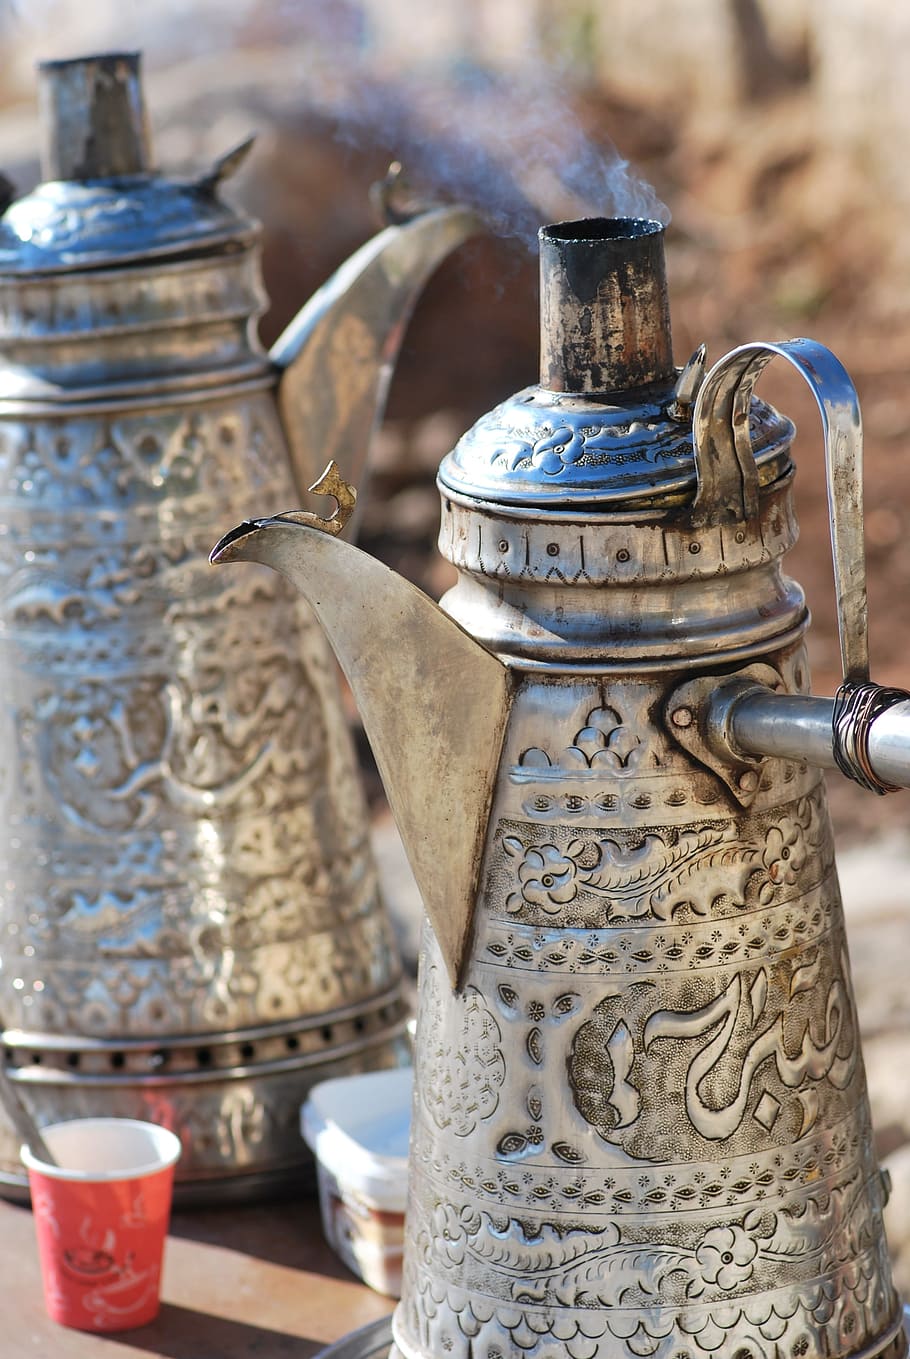 arabia, coffee, coffeepot, metal, container, focus on foreground, close-up, antique, still life, day